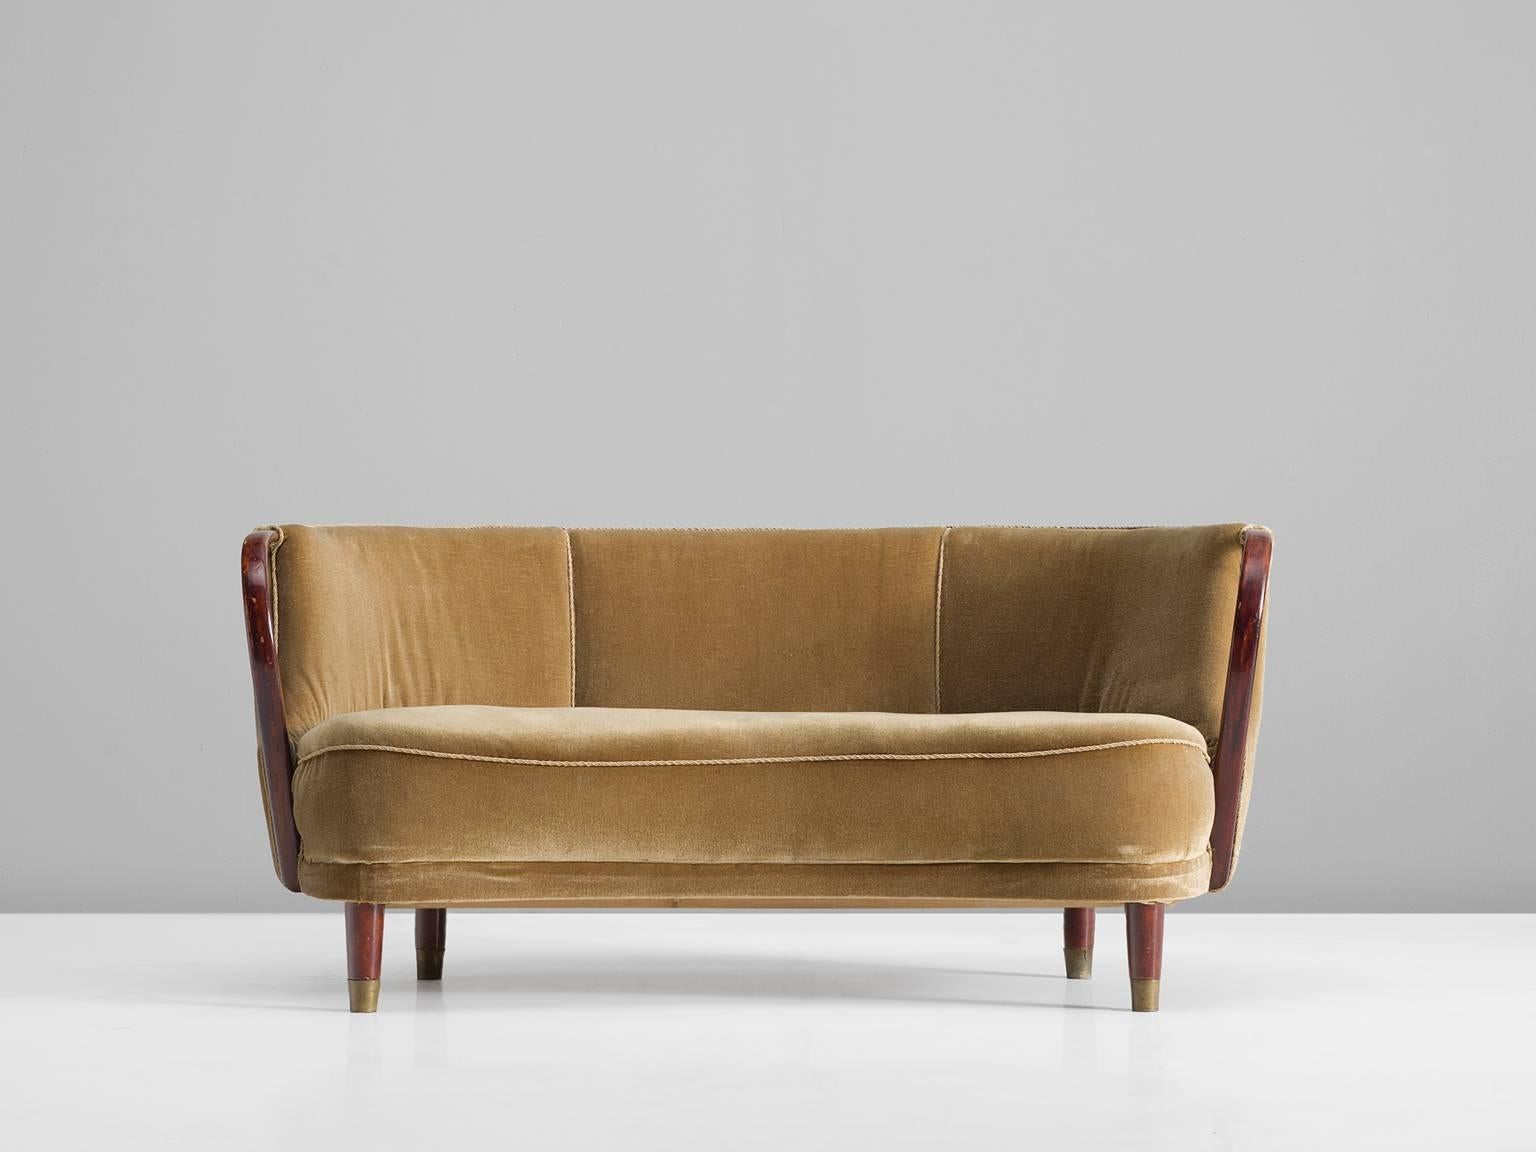 Three-seat sofa, beige to sand upholstery, wood, brass, Manufactured by Bramin, N. A. Jørgensens Møbelfabrik, Denmark, 1950s.

This Danish sofa features a backrest that is divided into three sections. The seat is thick and features a delicate